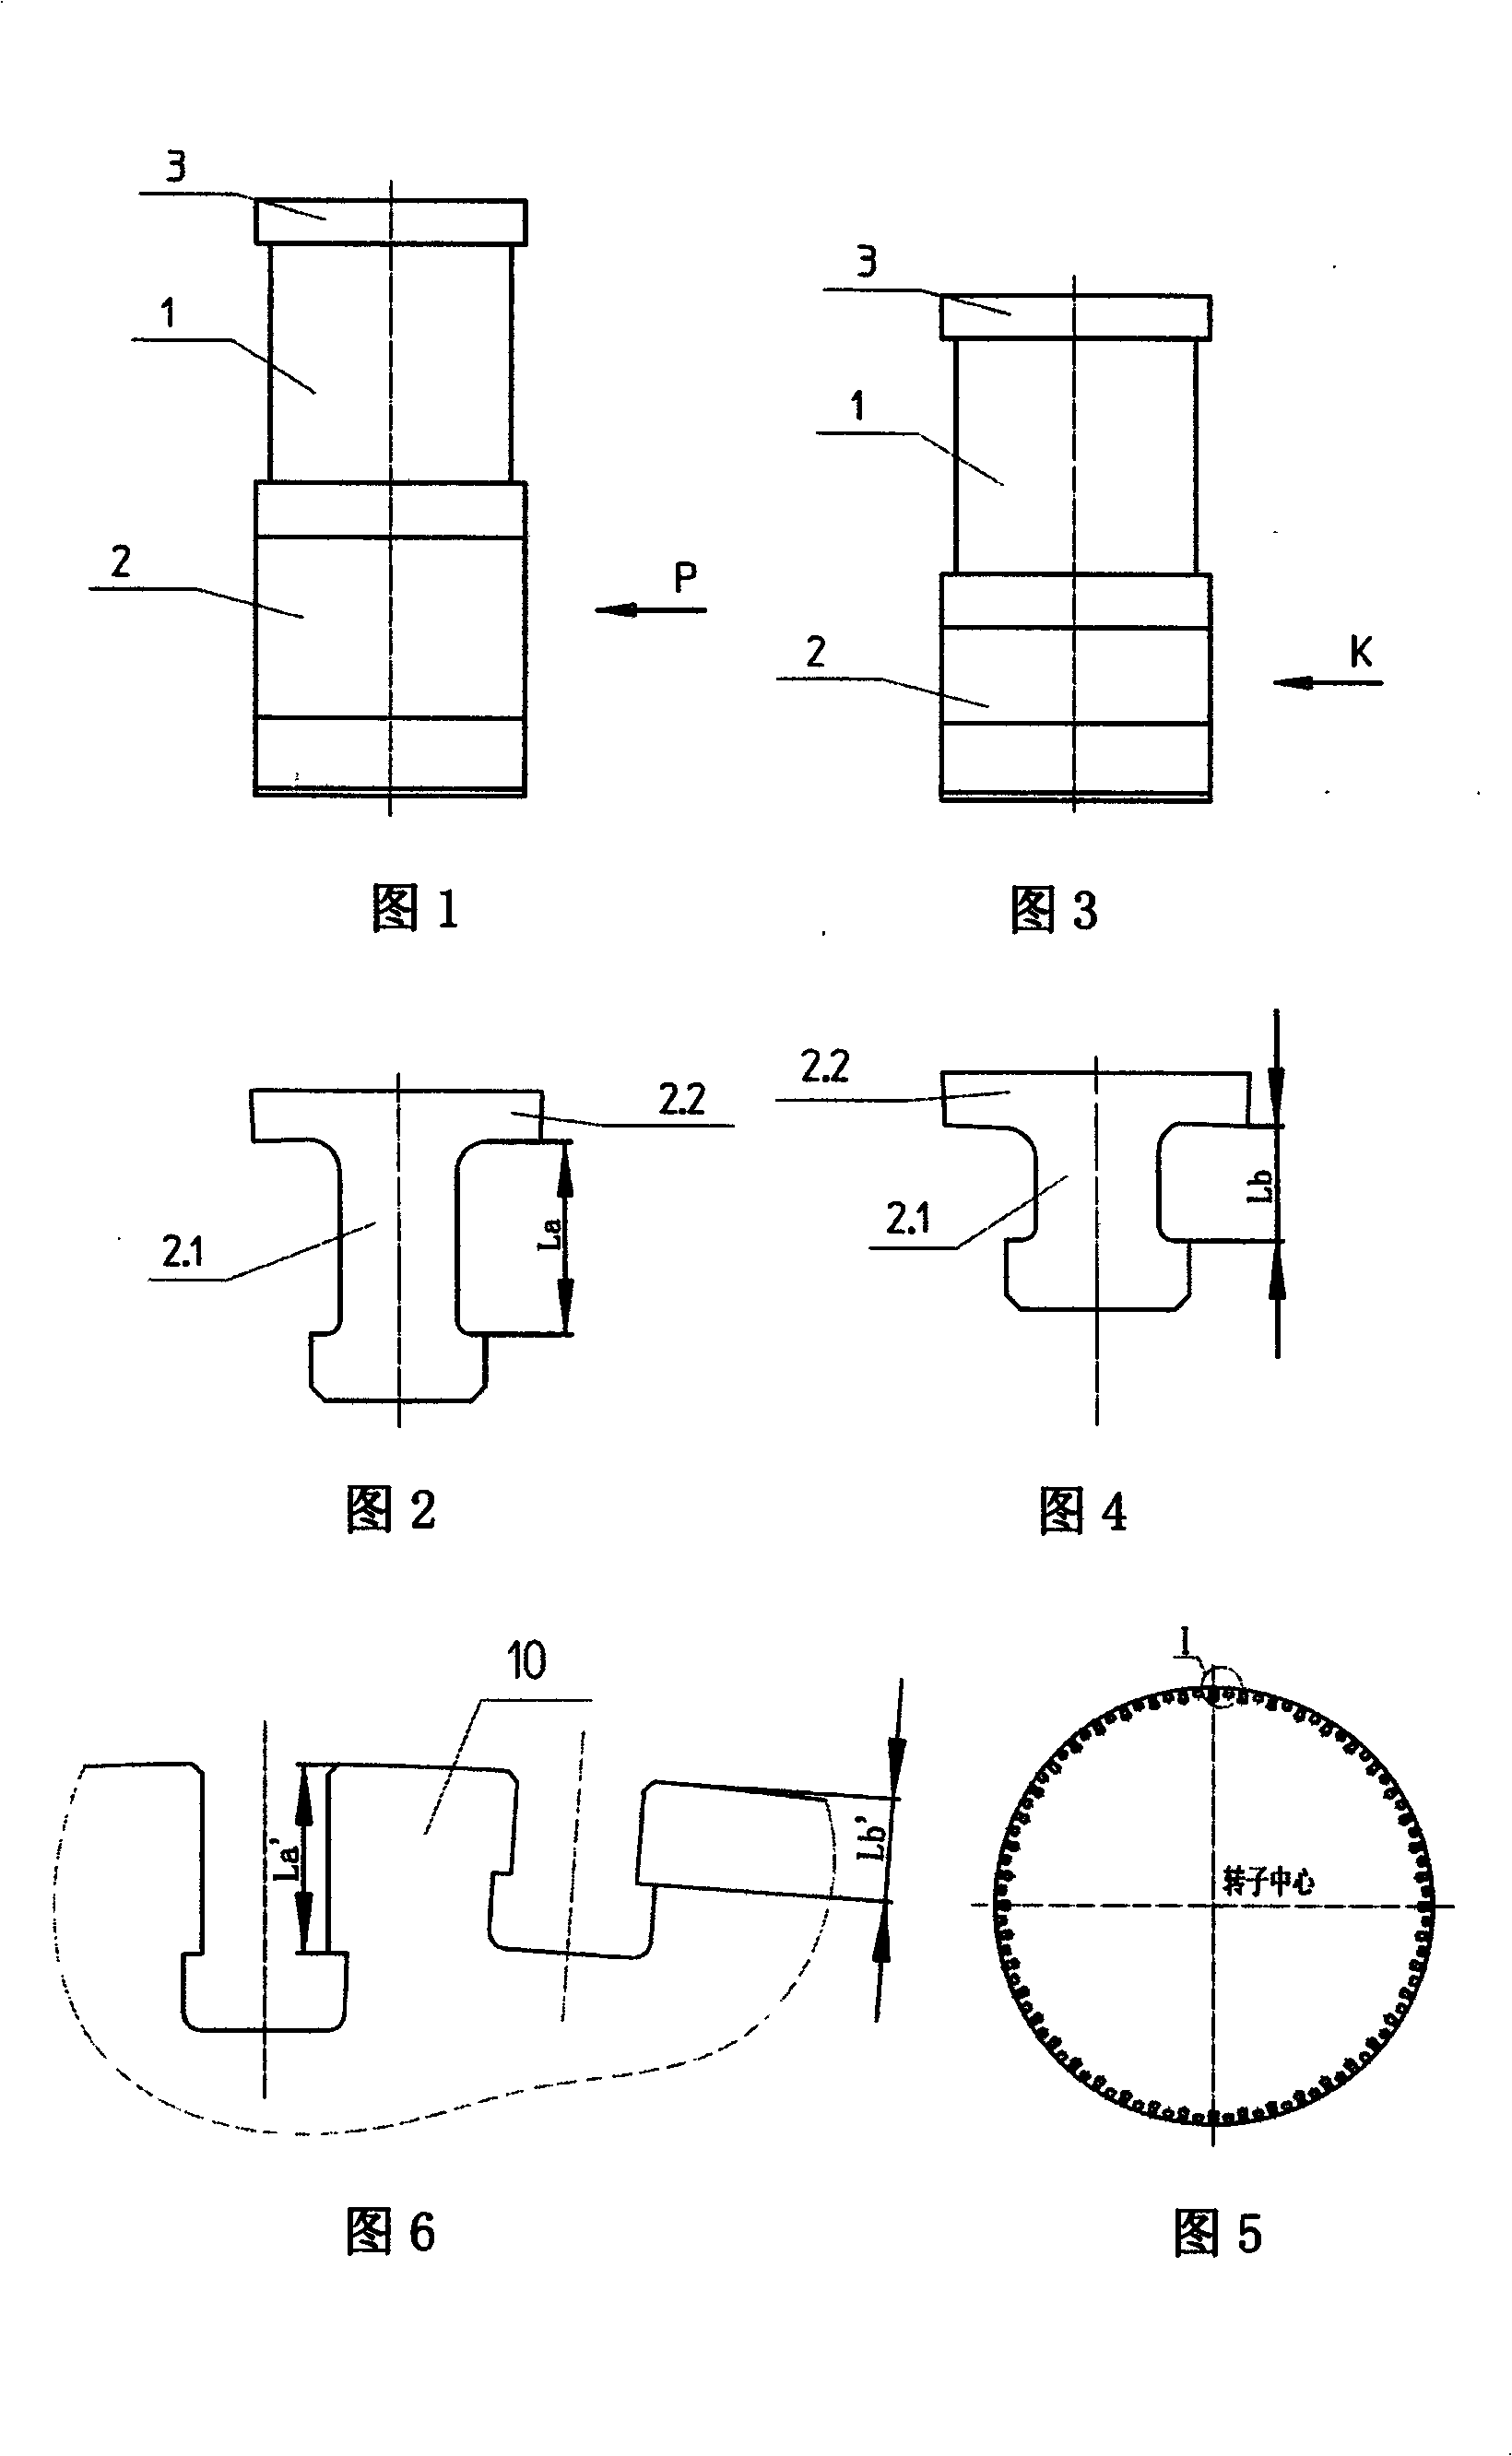 Full level steam turbine short movable vane without frequency modulation